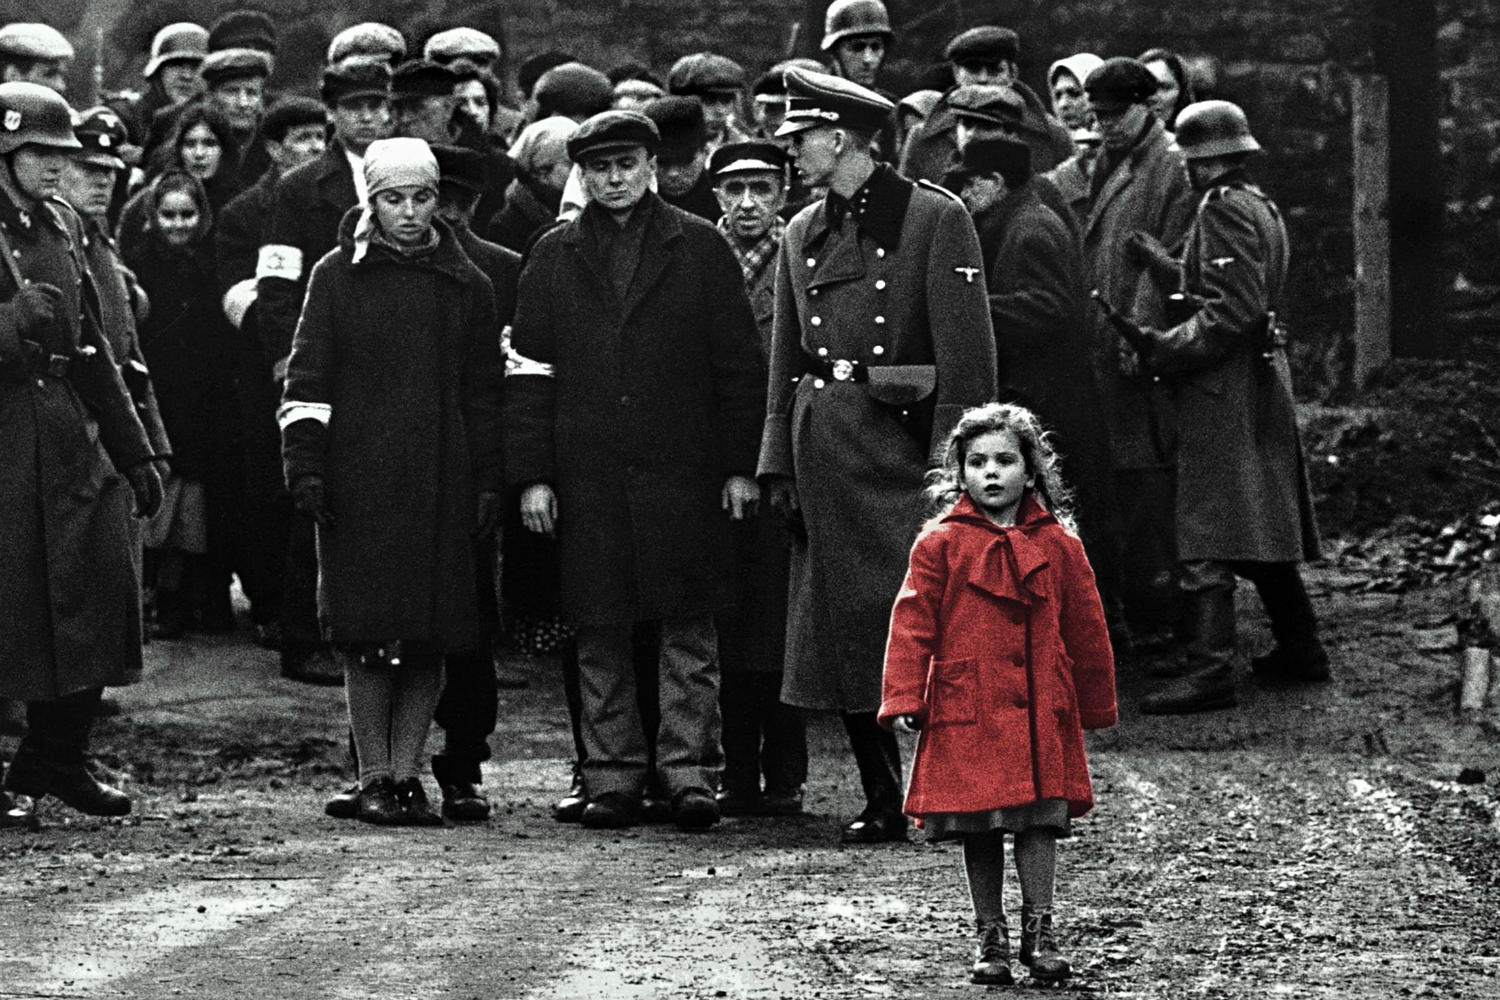 The girl in the red coat in Schindler's List.